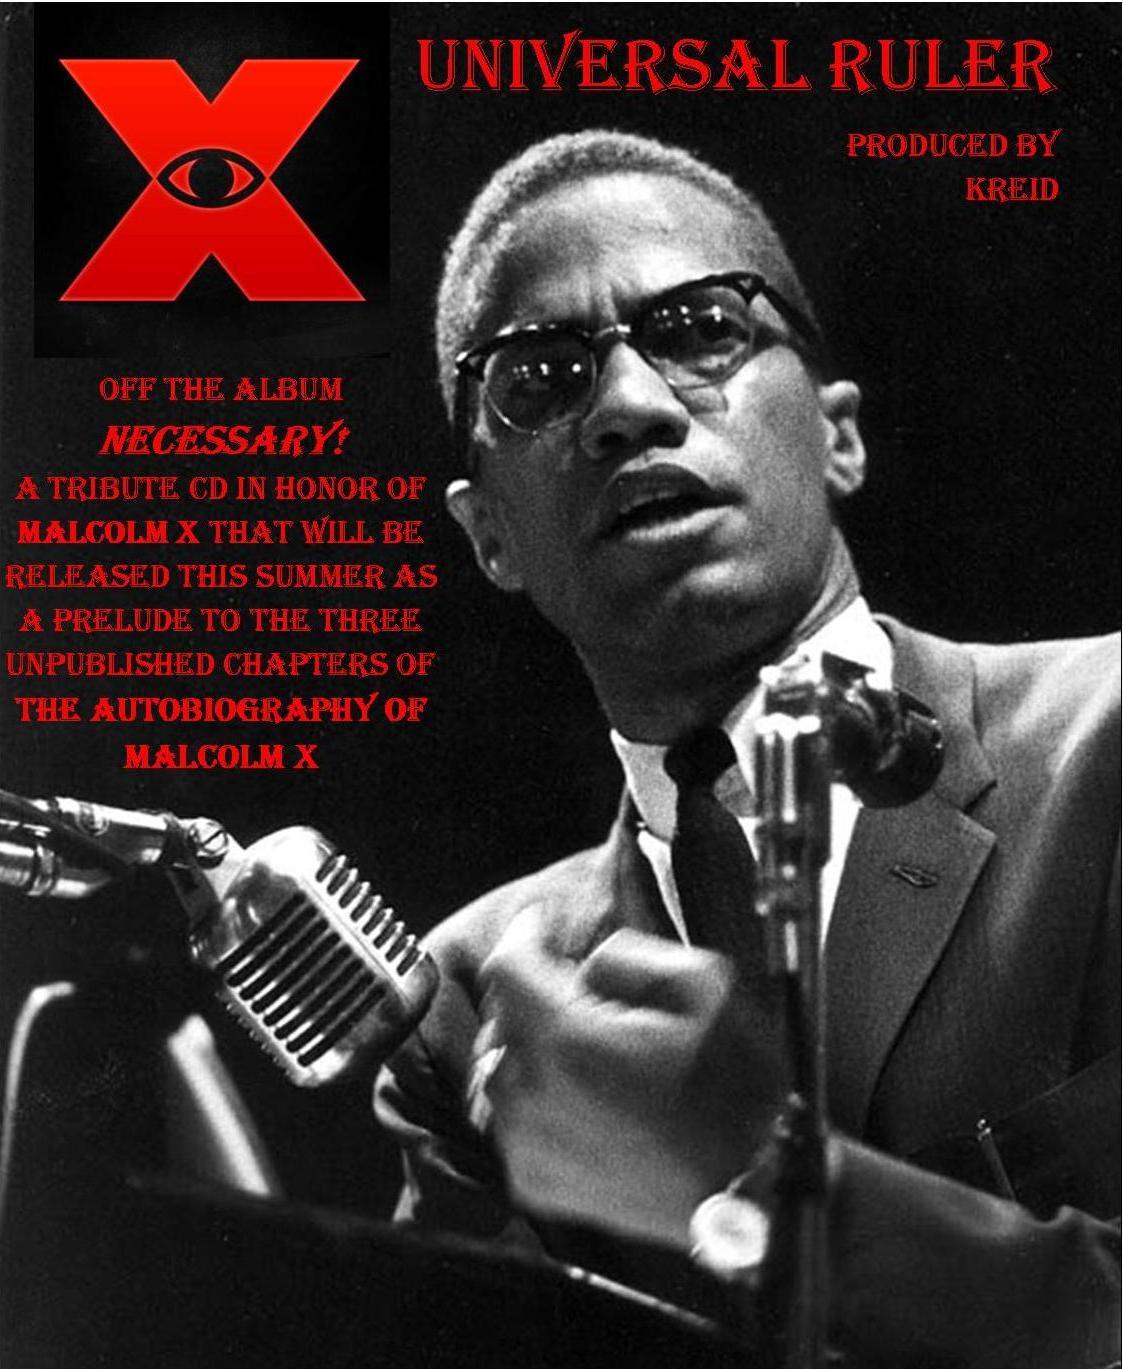 NECESSARY! a tribute CD in honor of Malcolm X features Jasiri X